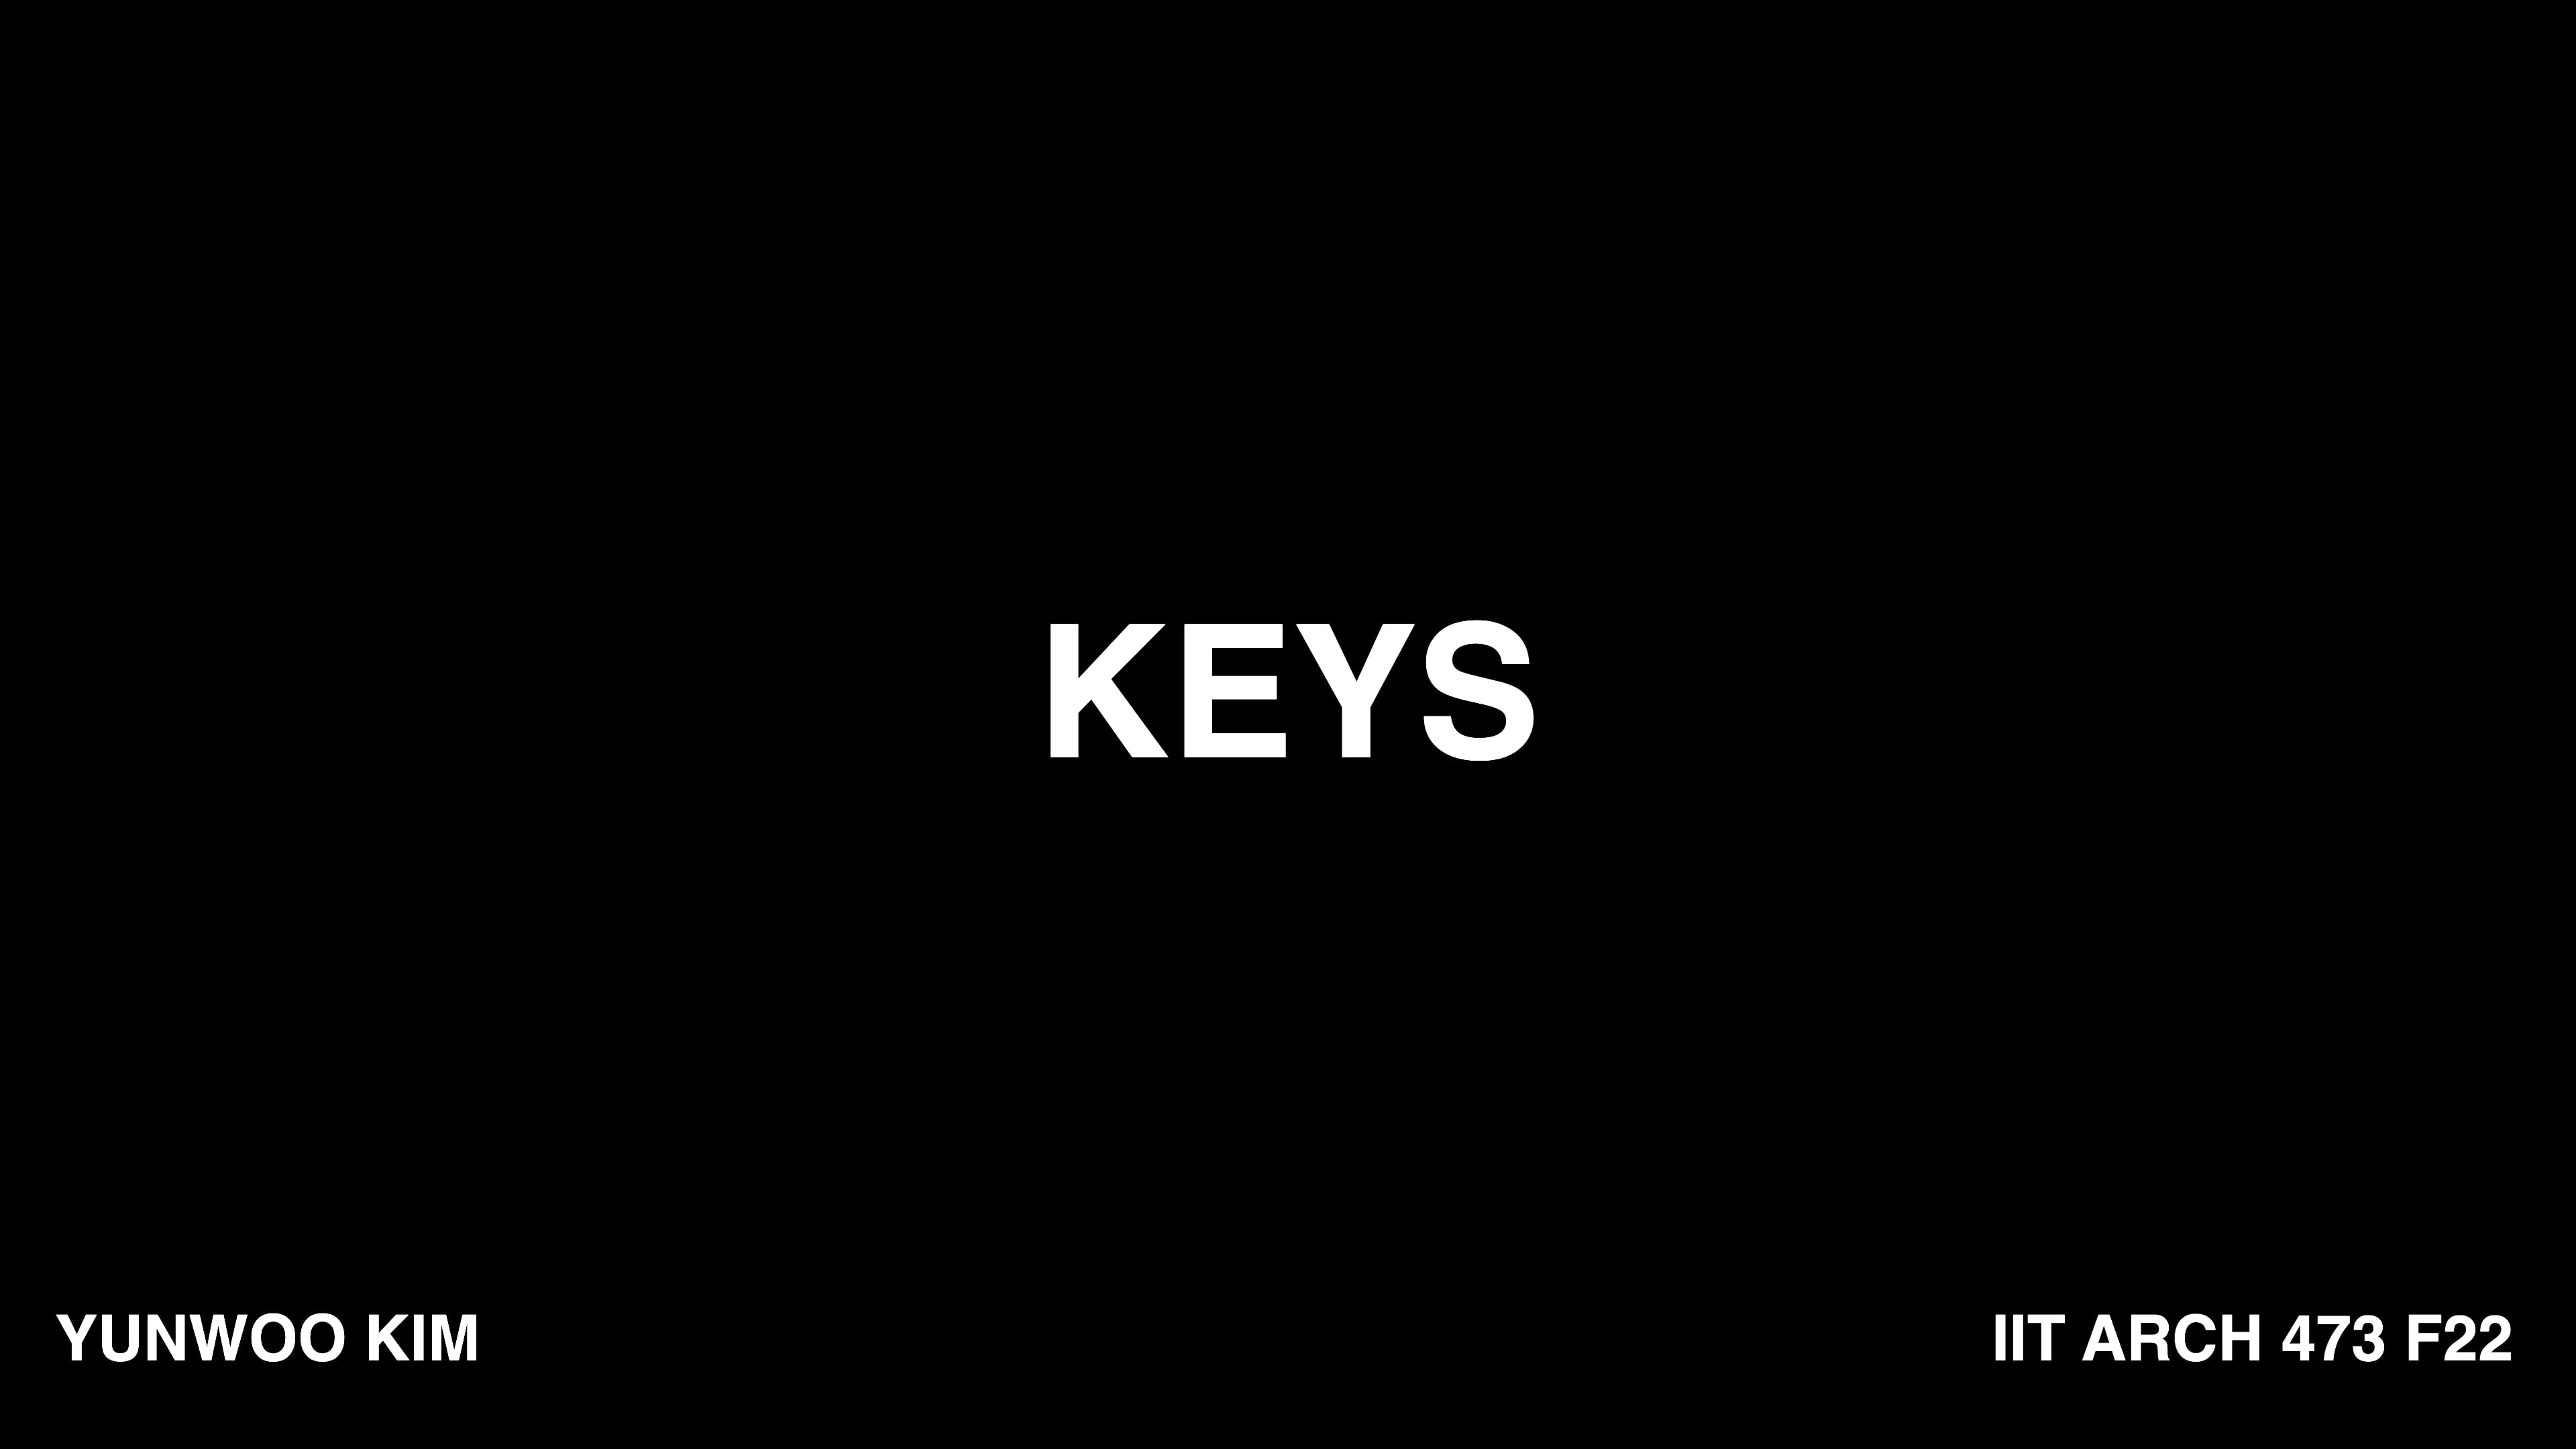 This is "FALL_ARCH473_JONATHAN-MILLER_KimYunwoo_Keys" by Jeffrey Wigen on Vimeo, the home for high quality videos and the people who love them.